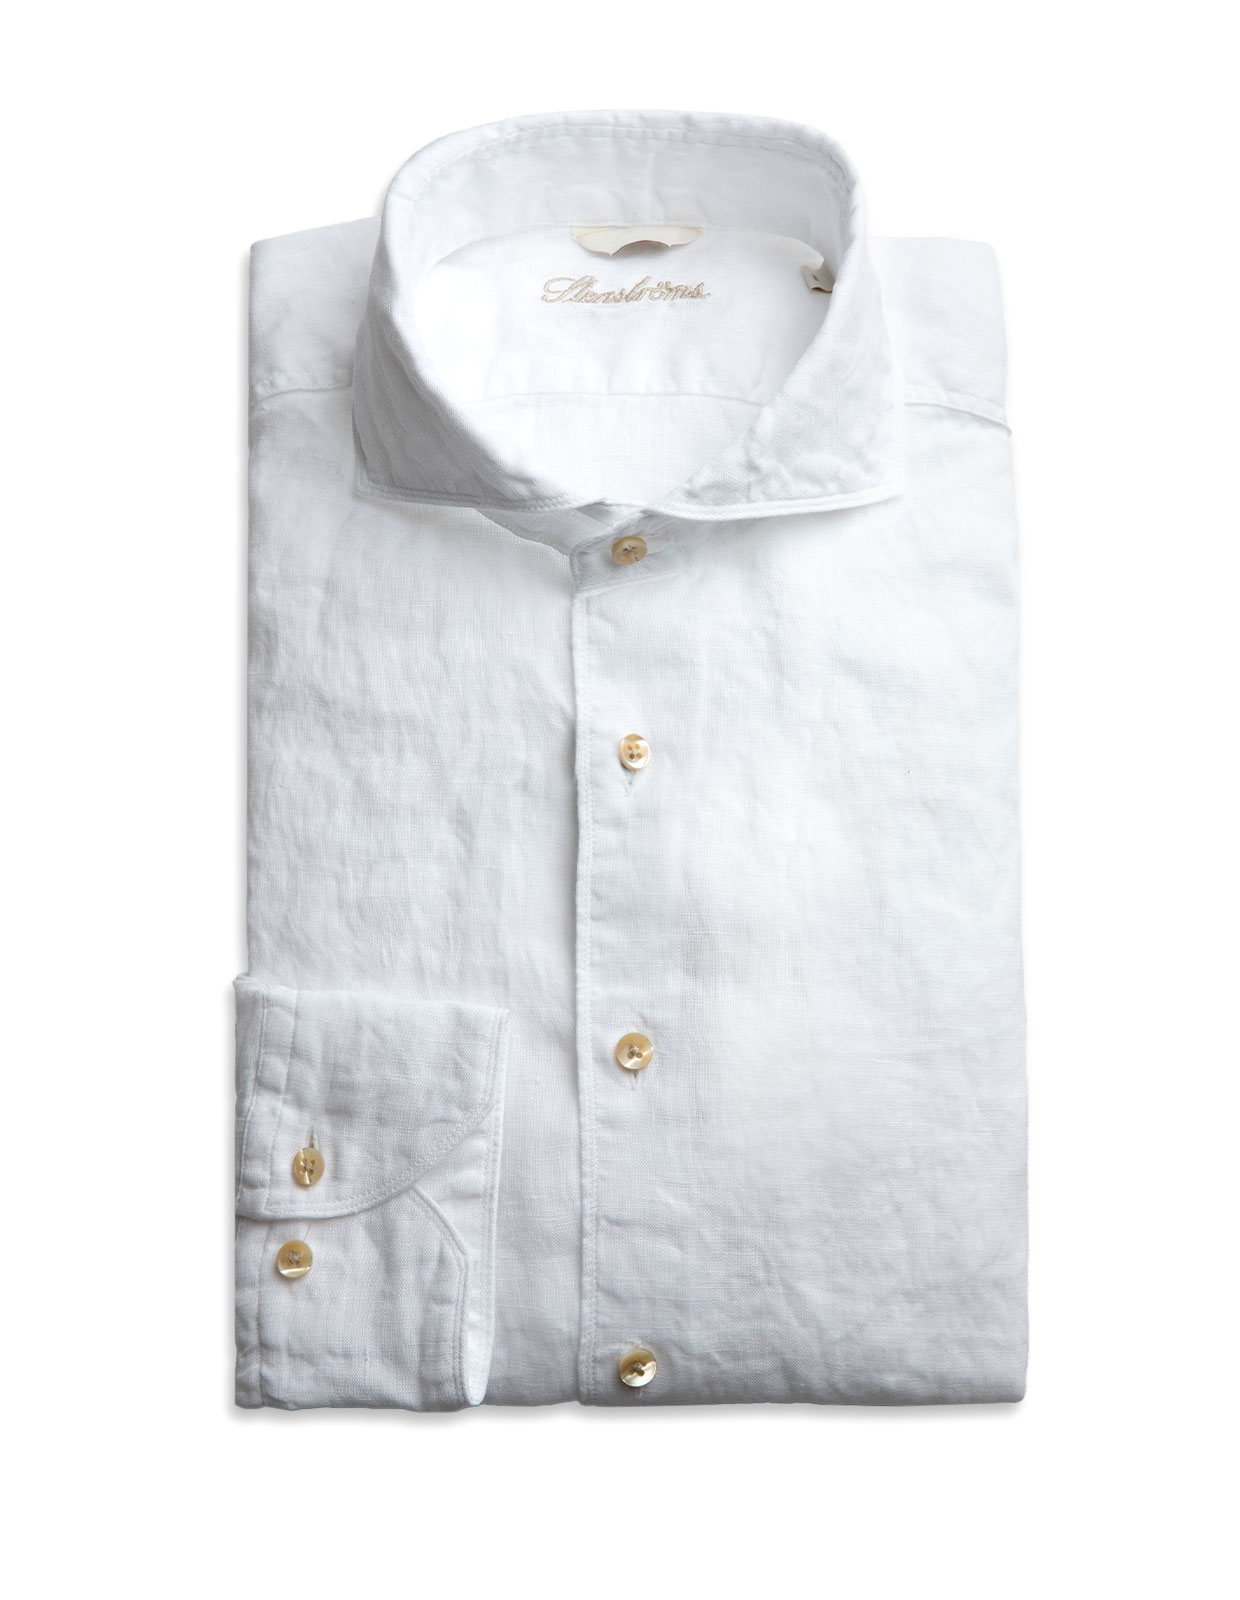 Fitted Body Linen Shirt White Stl M